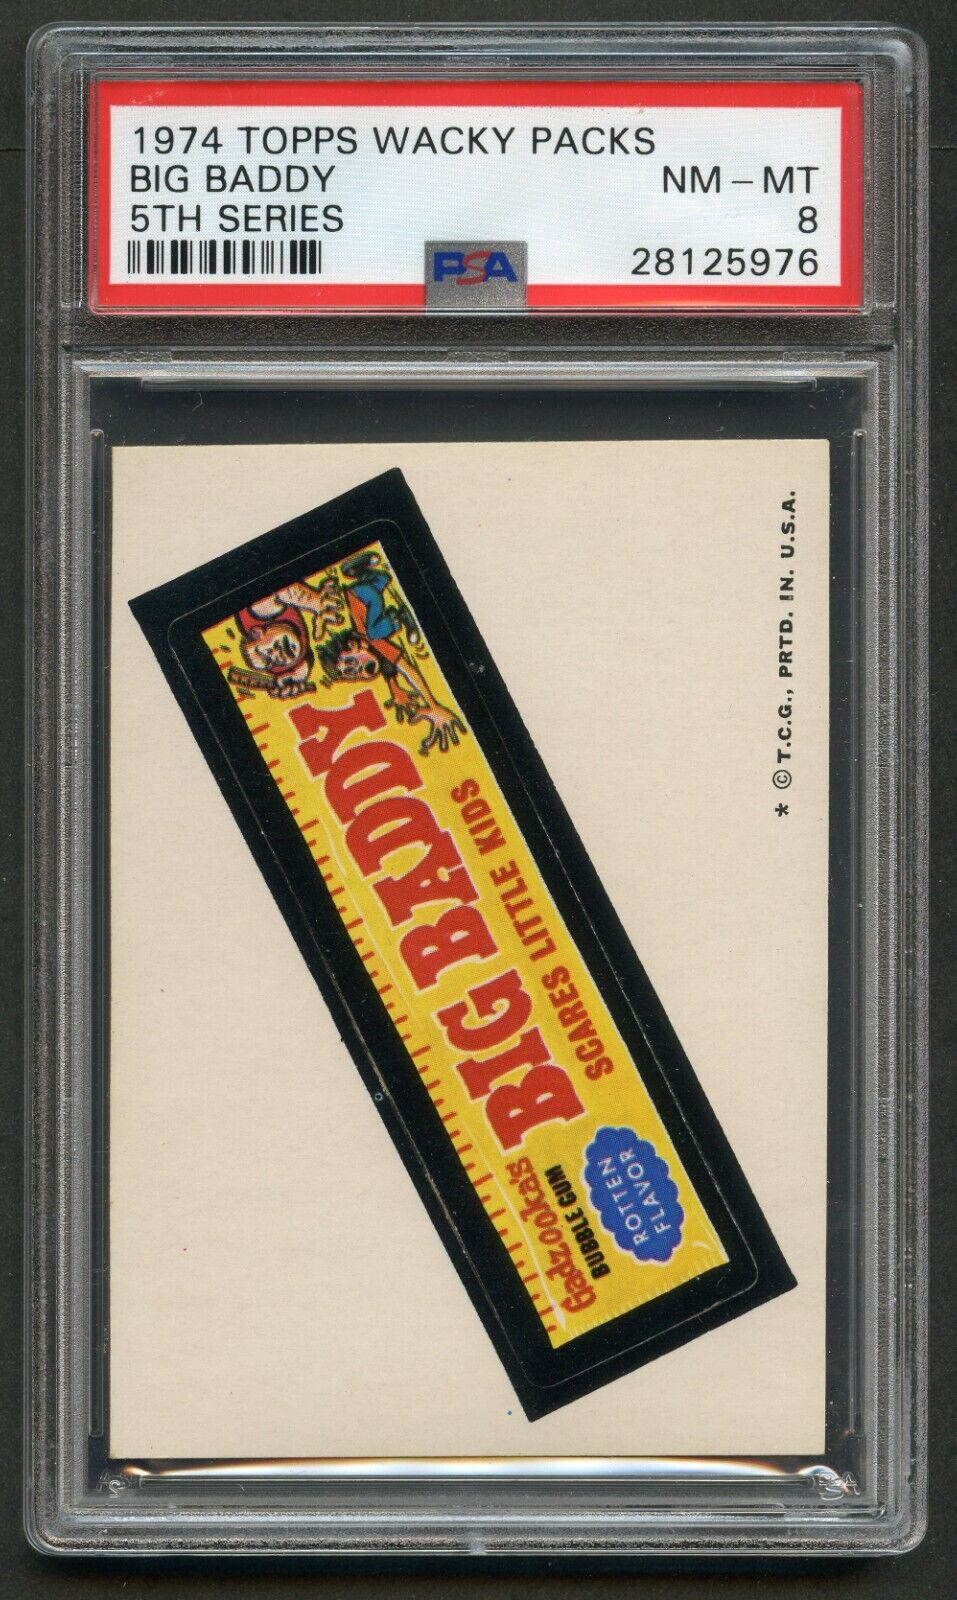 1974 Topps Wacky Packages Big Baddy PSA 8 5th Series Nice